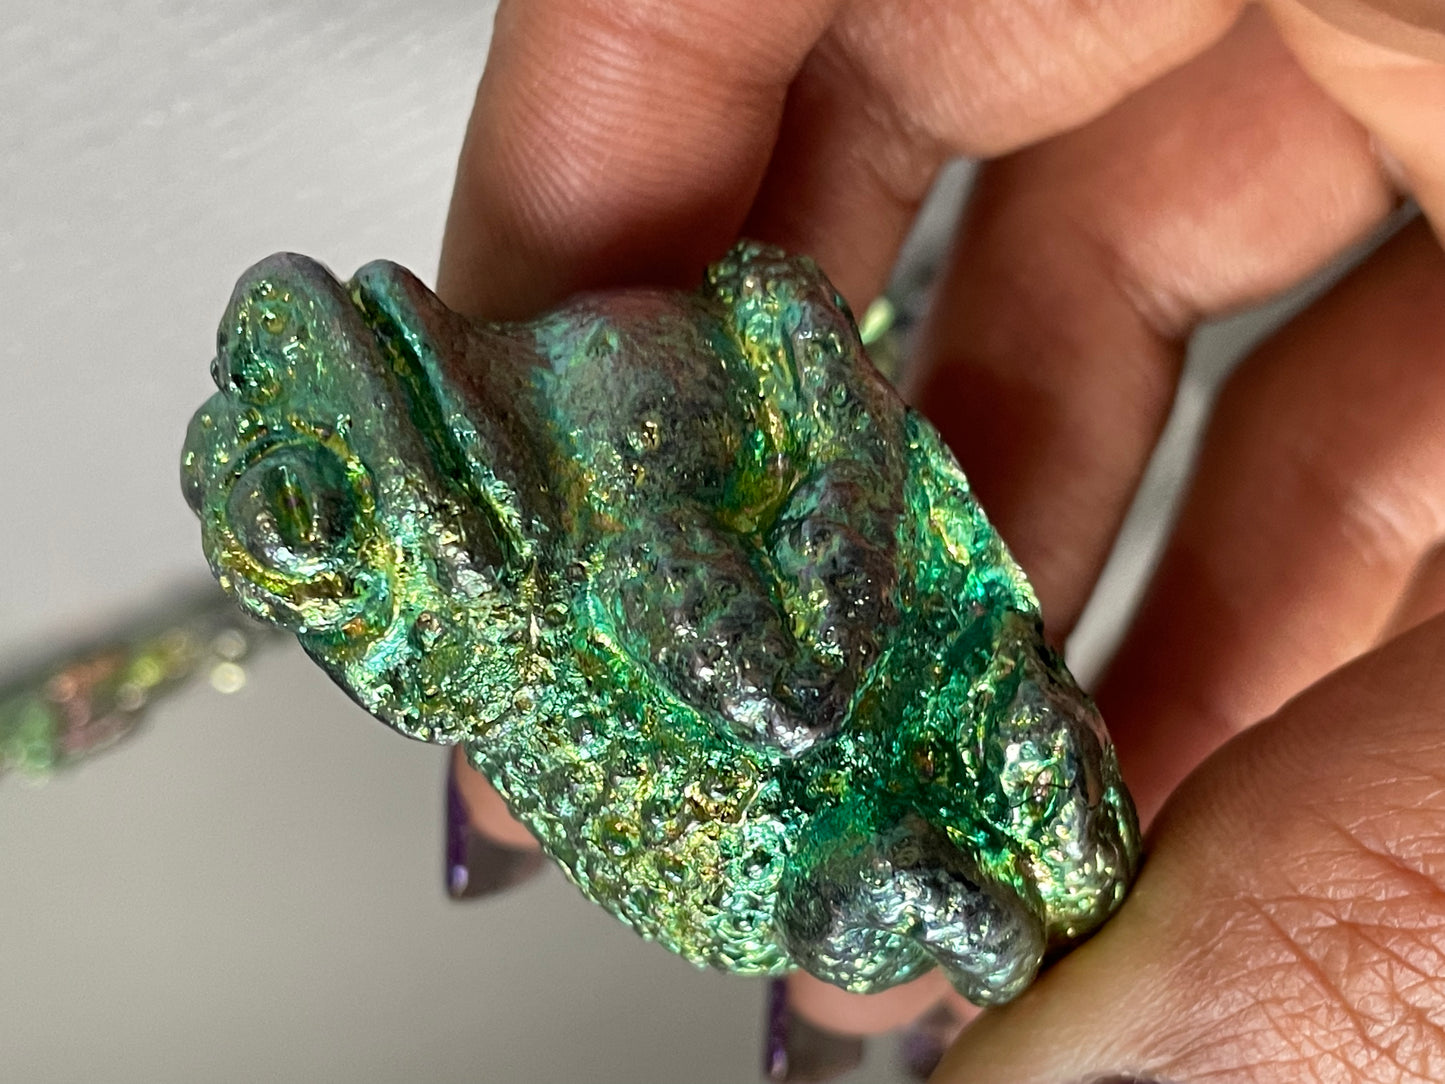 Green Teal Bismuth Crystal Small Toad Metal Art Sculpture